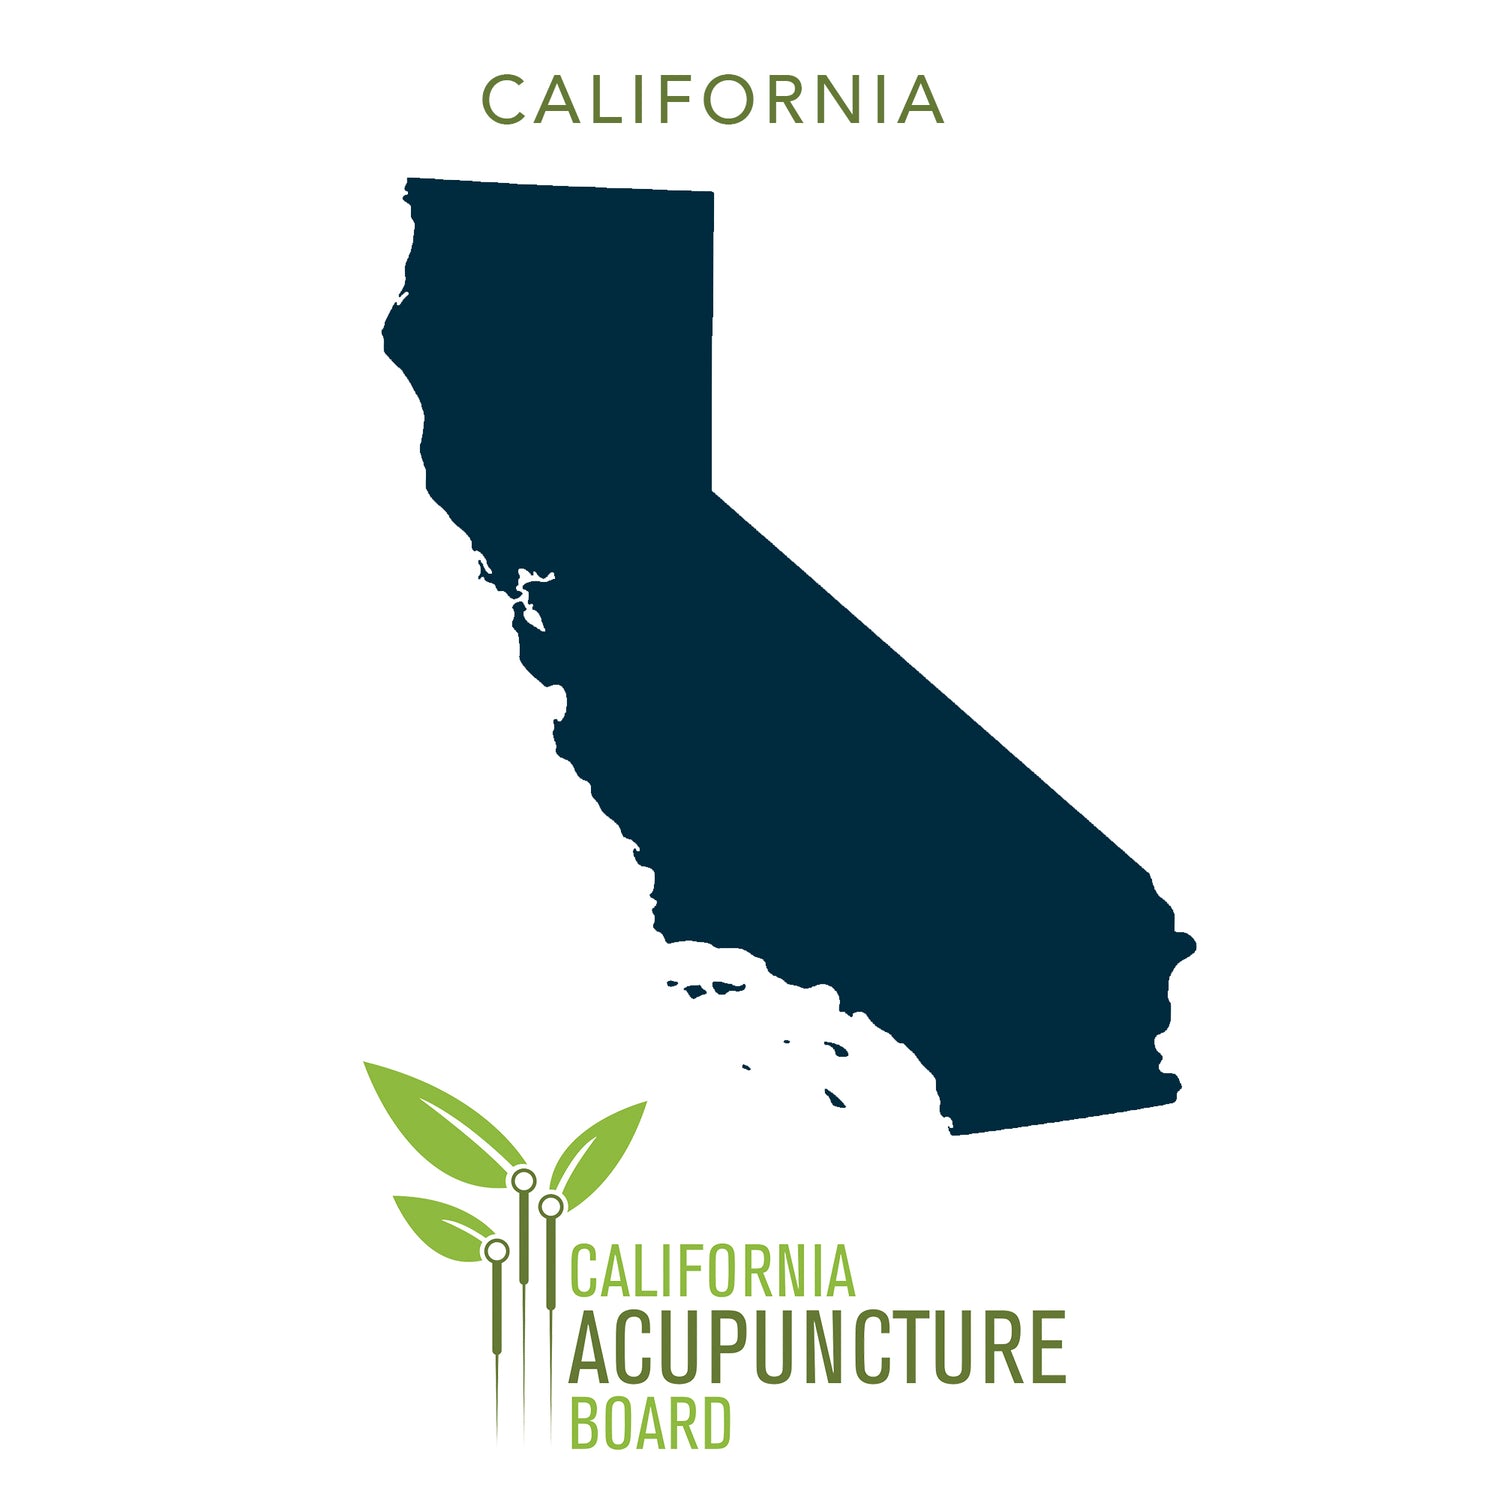 California Acupuncture Board Approved Acupuncture Continuing Education Courses